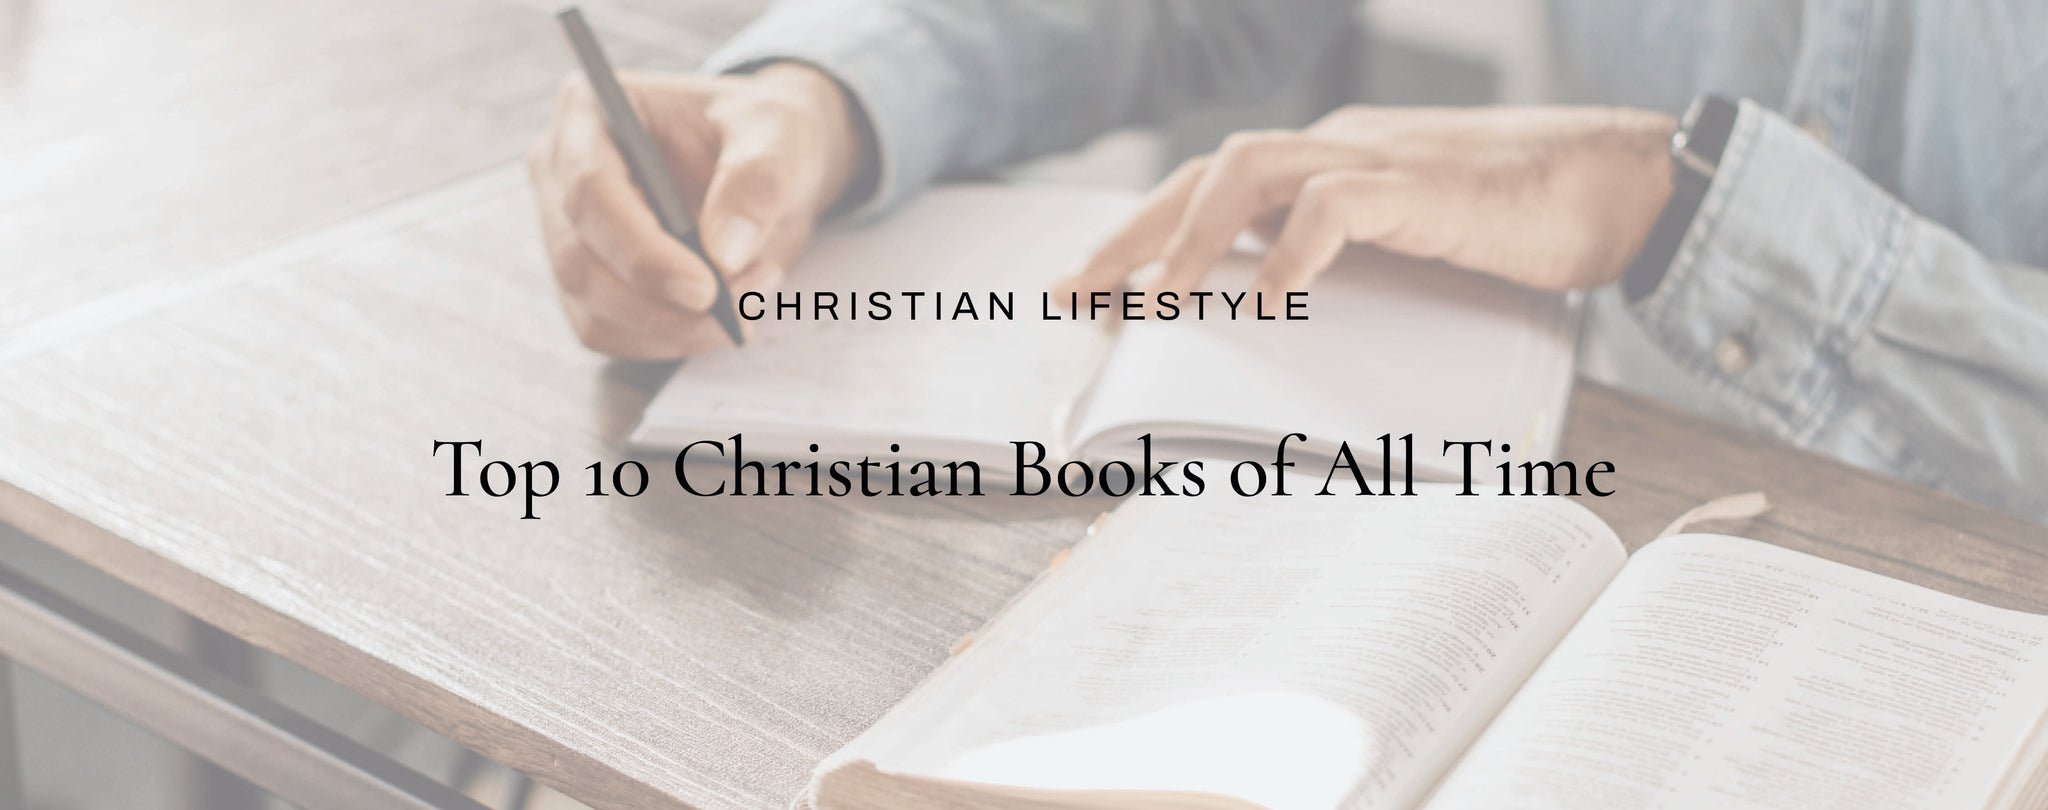 Top 10 Christian Books of All Time